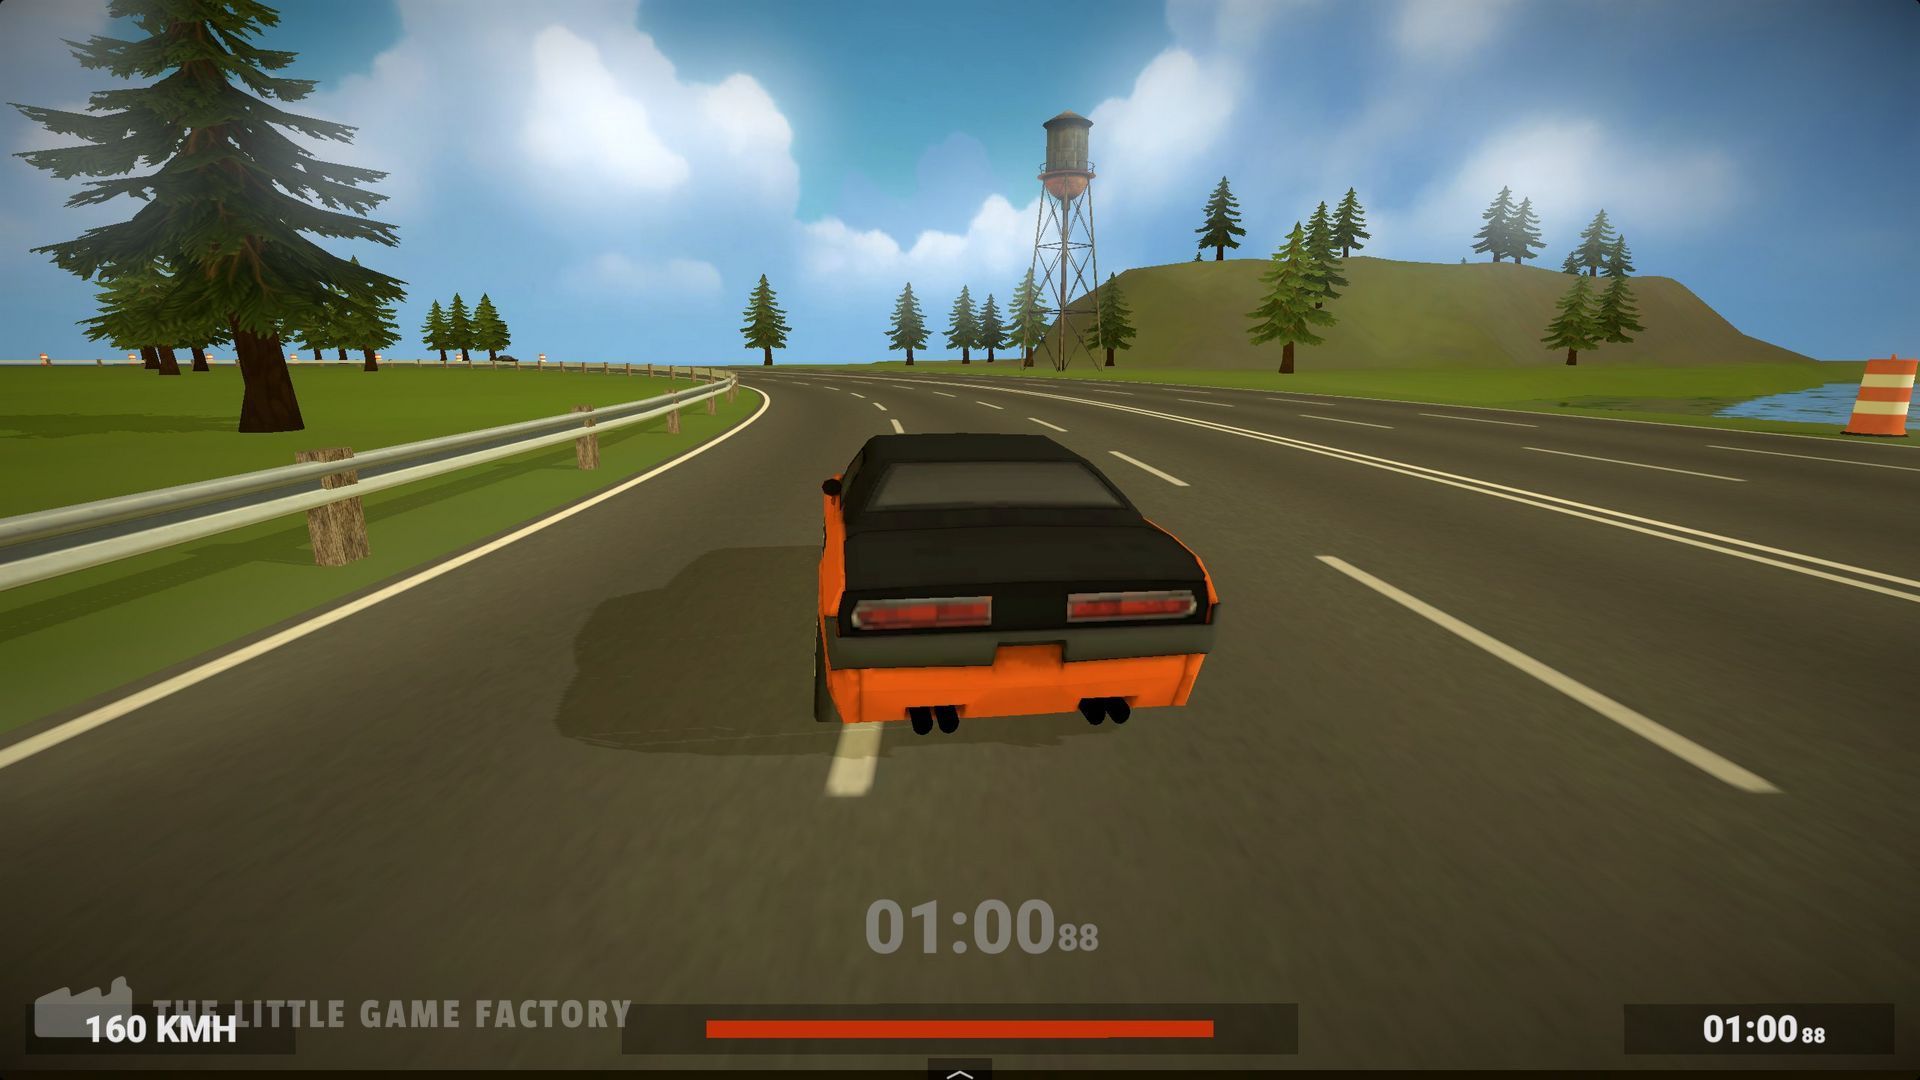 One Track Challenge Ingame Screenshot 1 | Unity WebGL game | Play WebGL games on thelittlegamefactory.com and supergoodgames.com